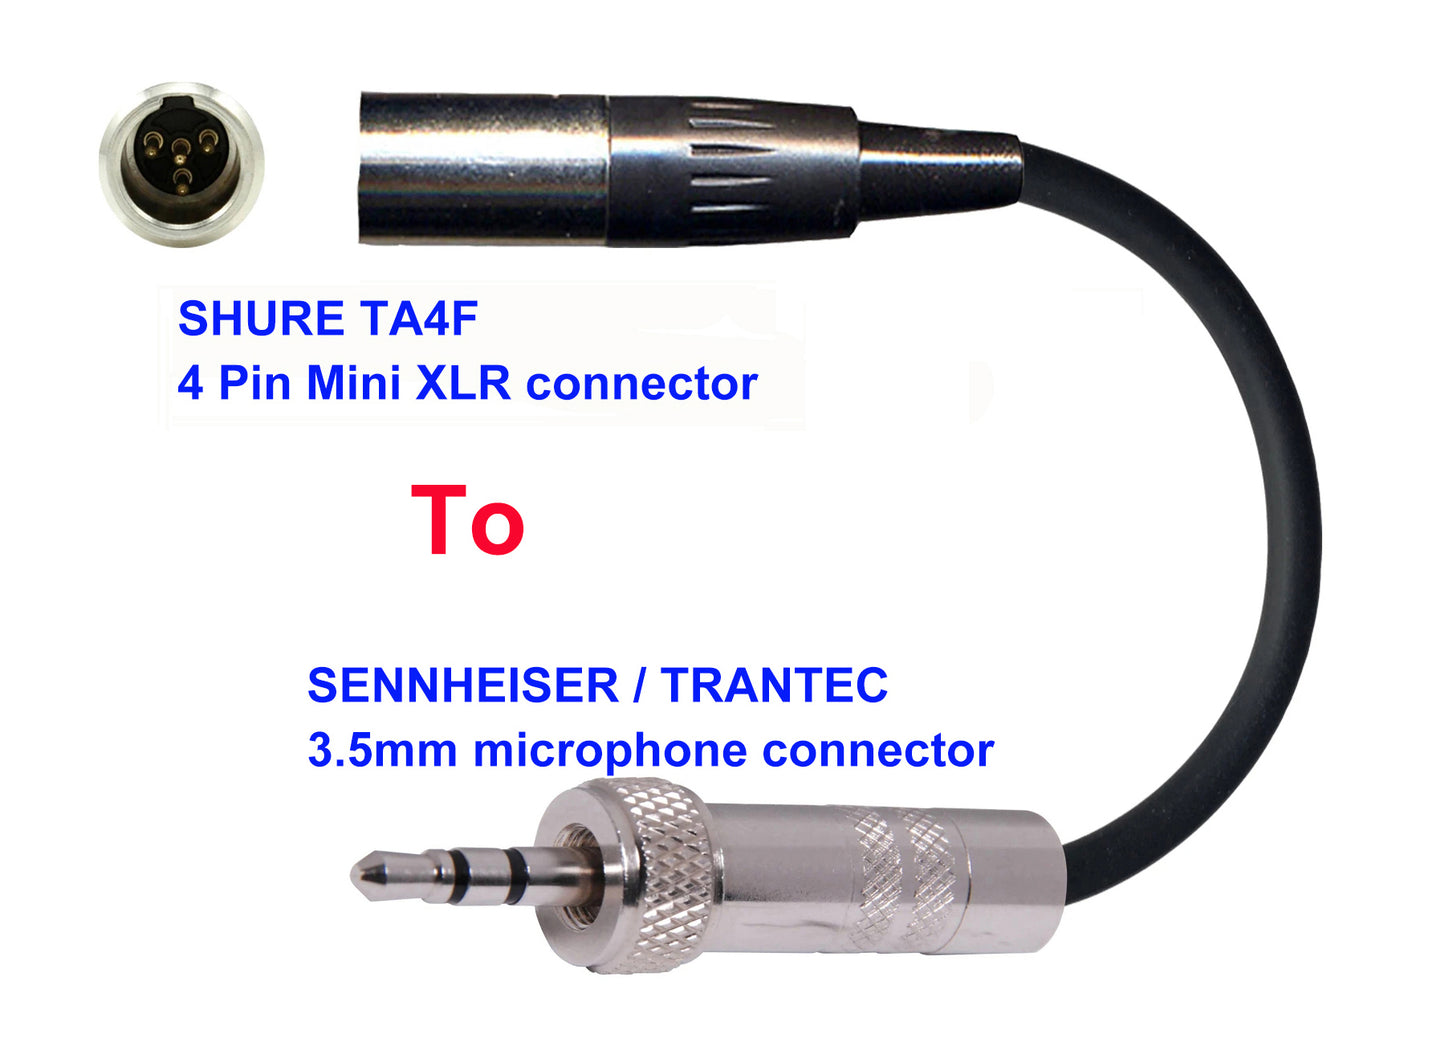 Microphone Adapter - Shure Microphones with TA4F 4 pin mini XLR connector TO Sennheiser / Trantec Transmitters with 3.5mm Locking connector